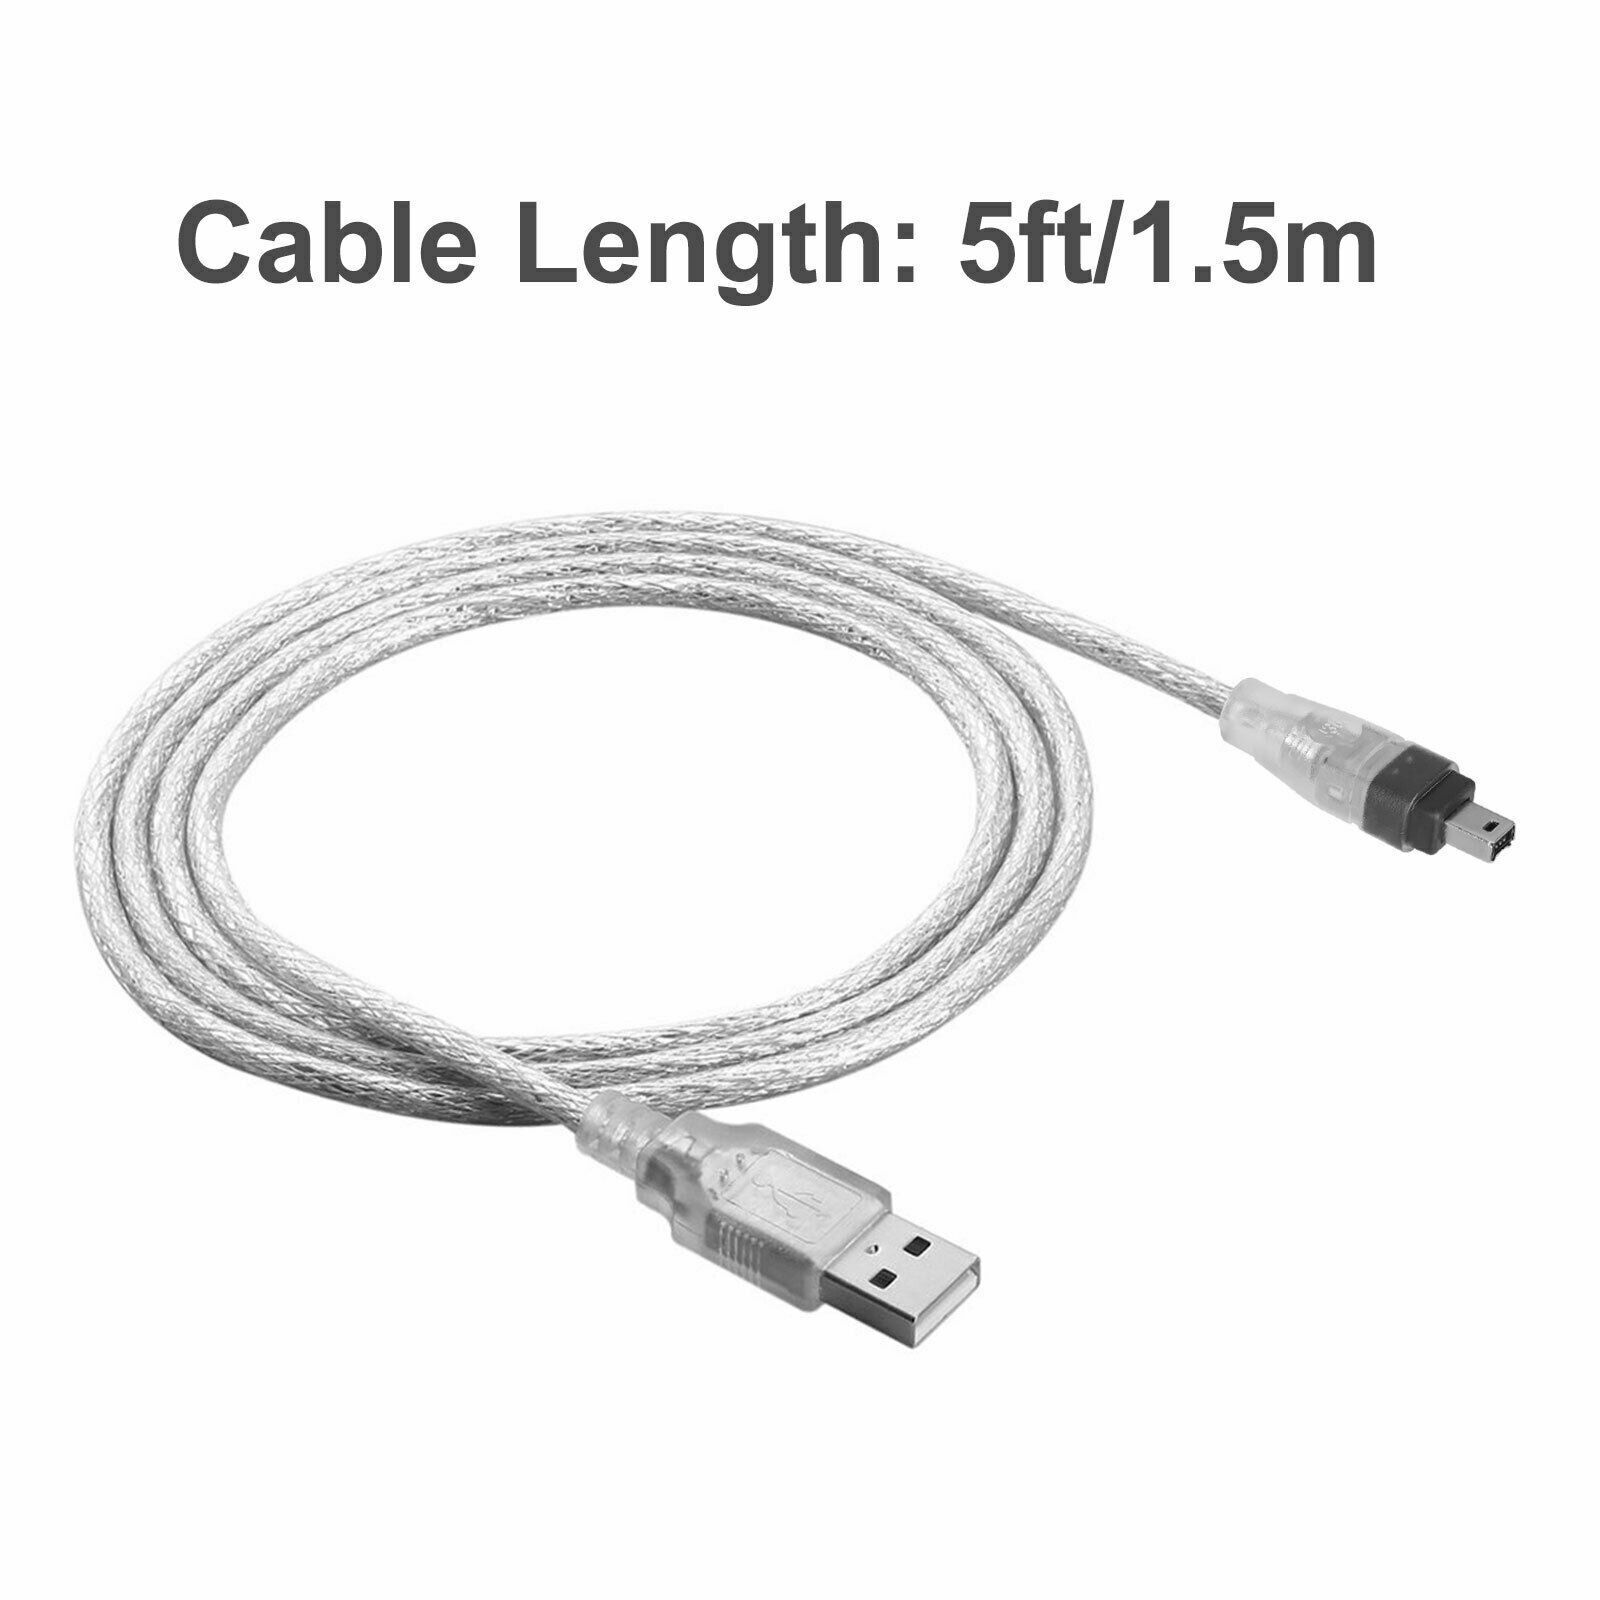 5ft USB To Firewire IEEE 1394 4 Pin iLink Adapter Data Cable USA for PC Camera